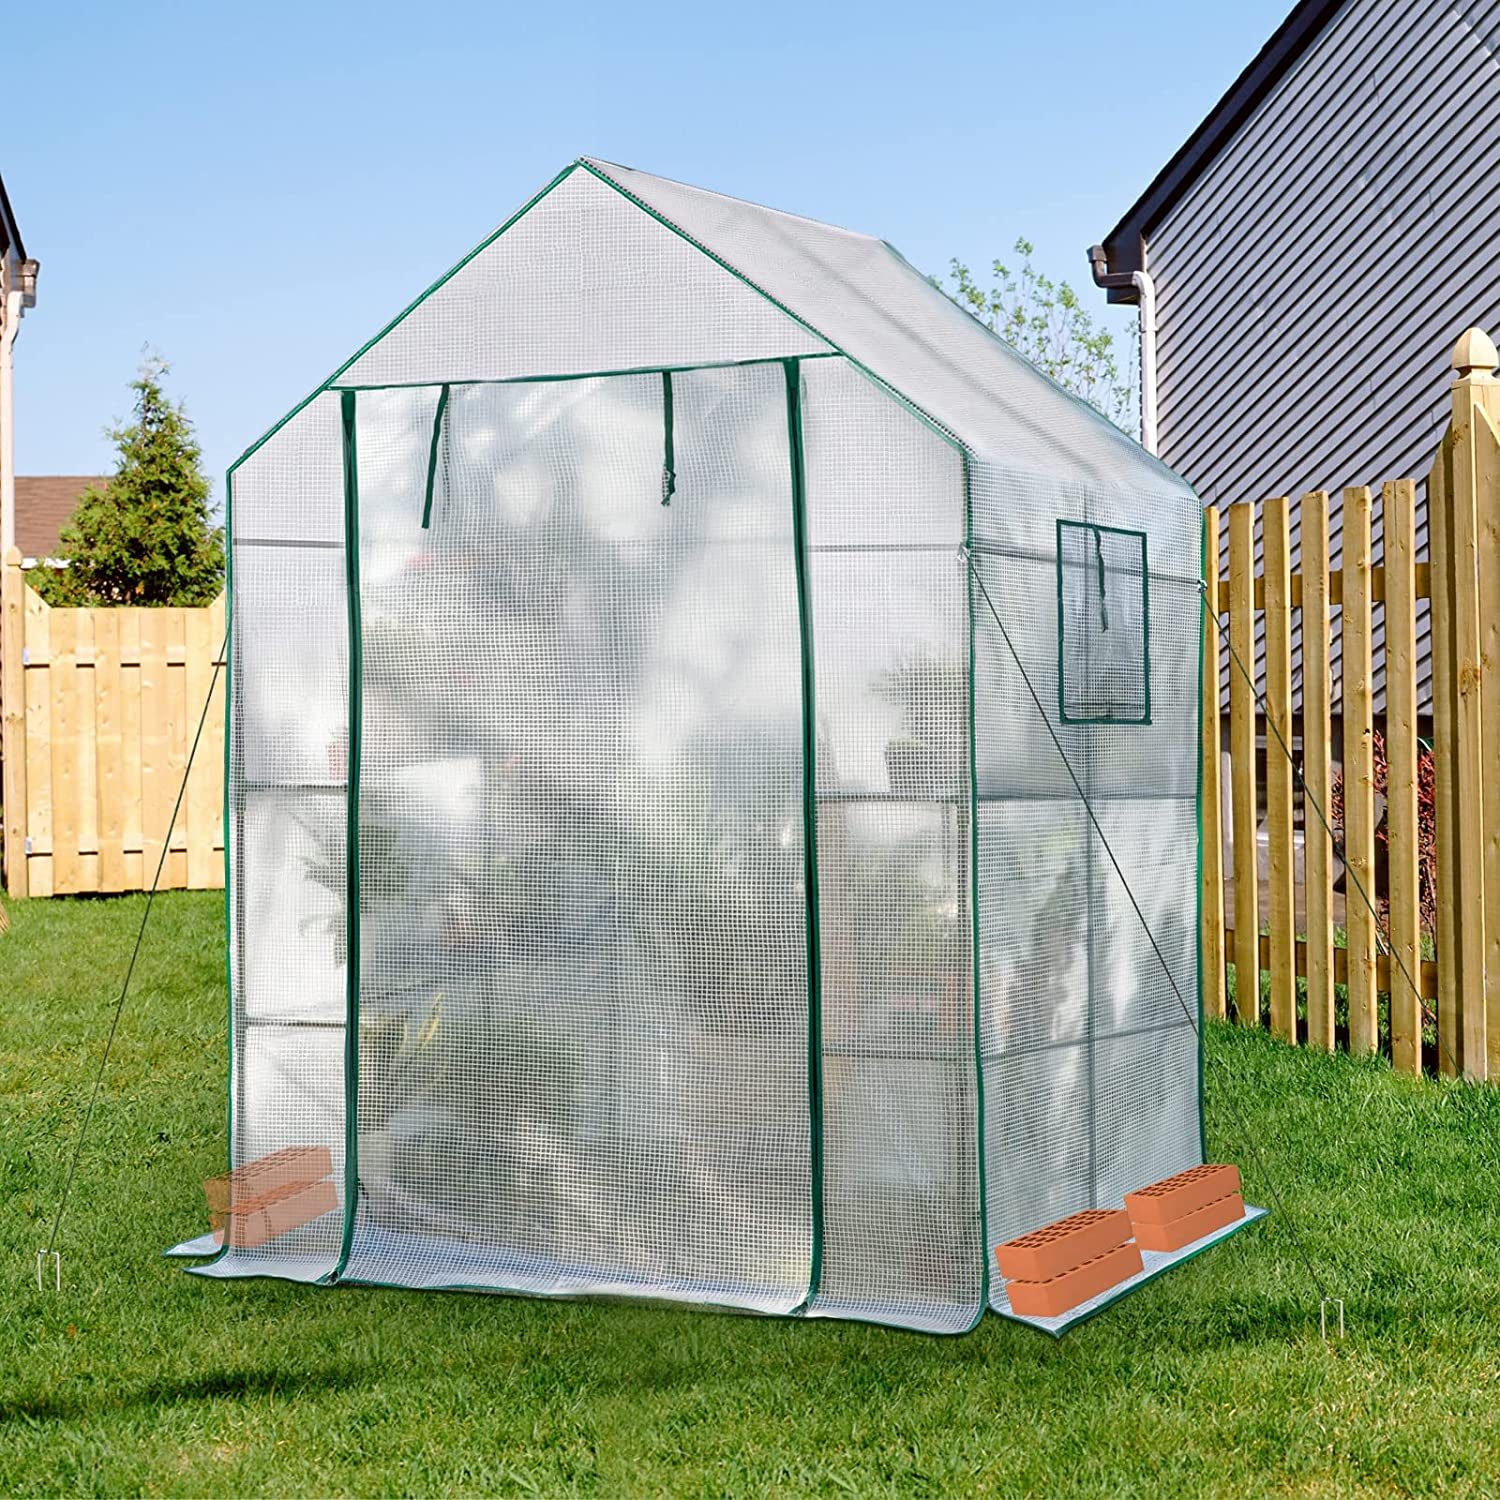 Amazon's Affordable, Portable Greenhouse Protects Plants All Winter